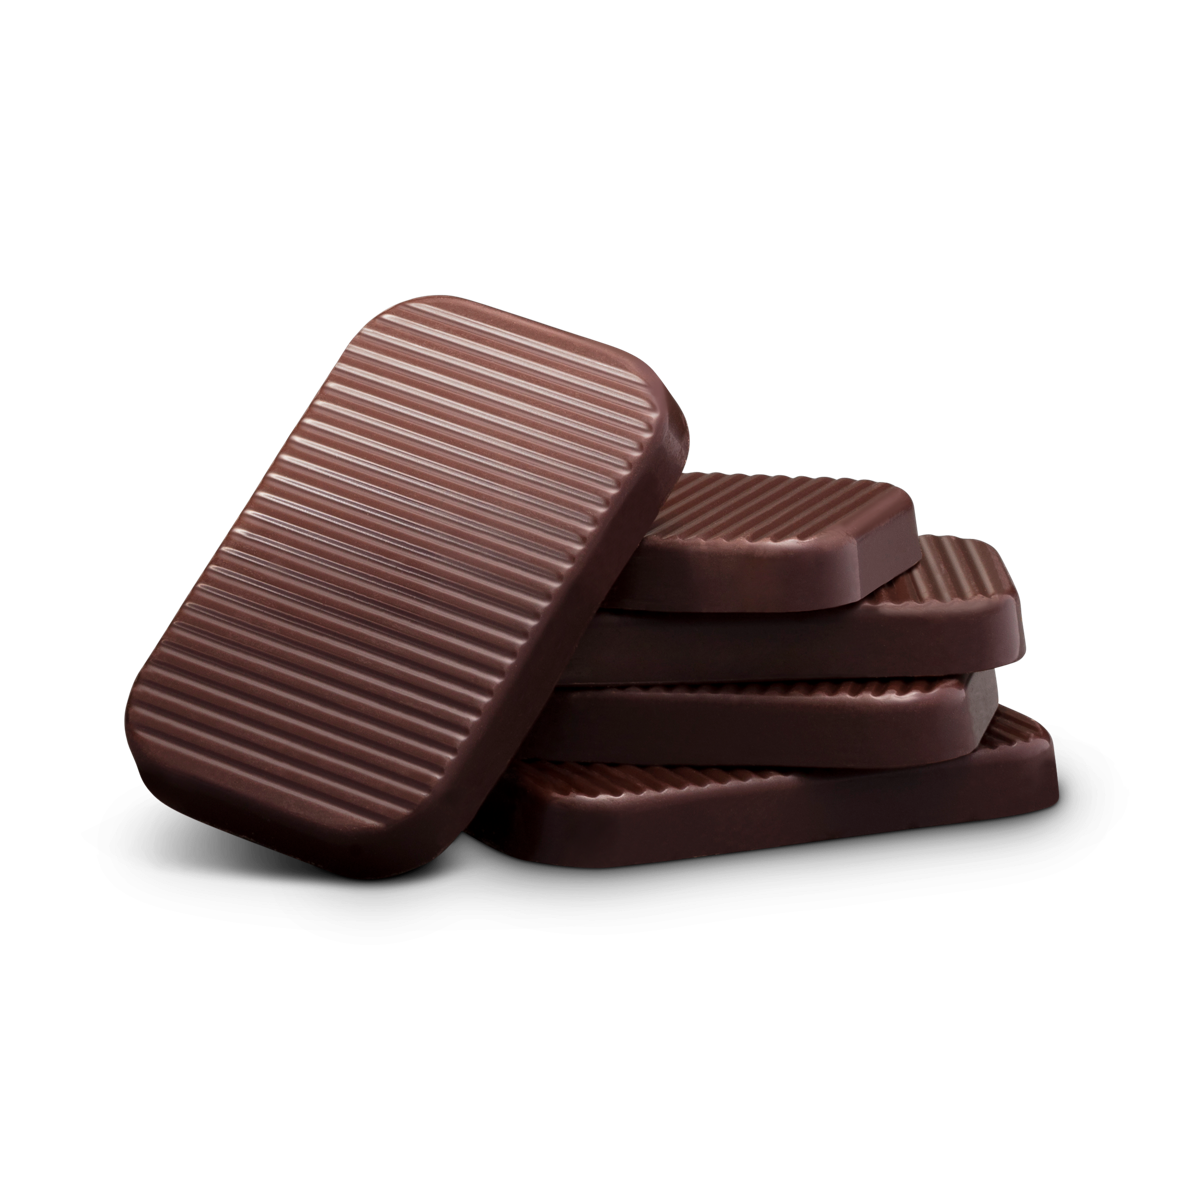 NEW TRIAL SIZE! Belgian Dark Chocolate Napolitains (72% Cacao)